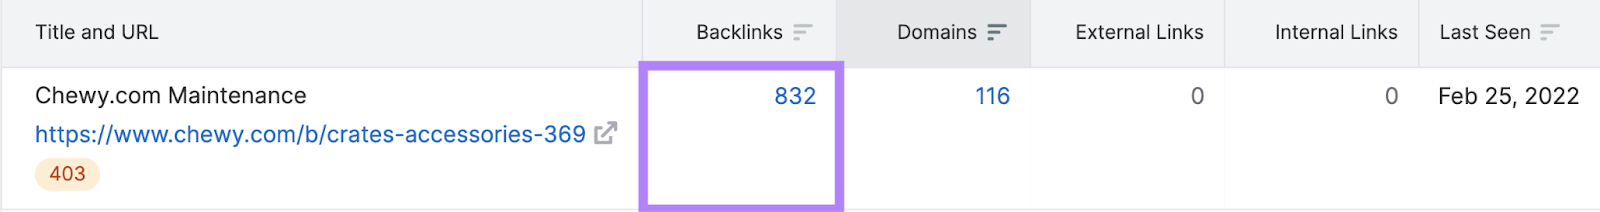 Backlinks fig   highlighted, successful  this lawsuit  determination   are 832 backlinks to this breached  page